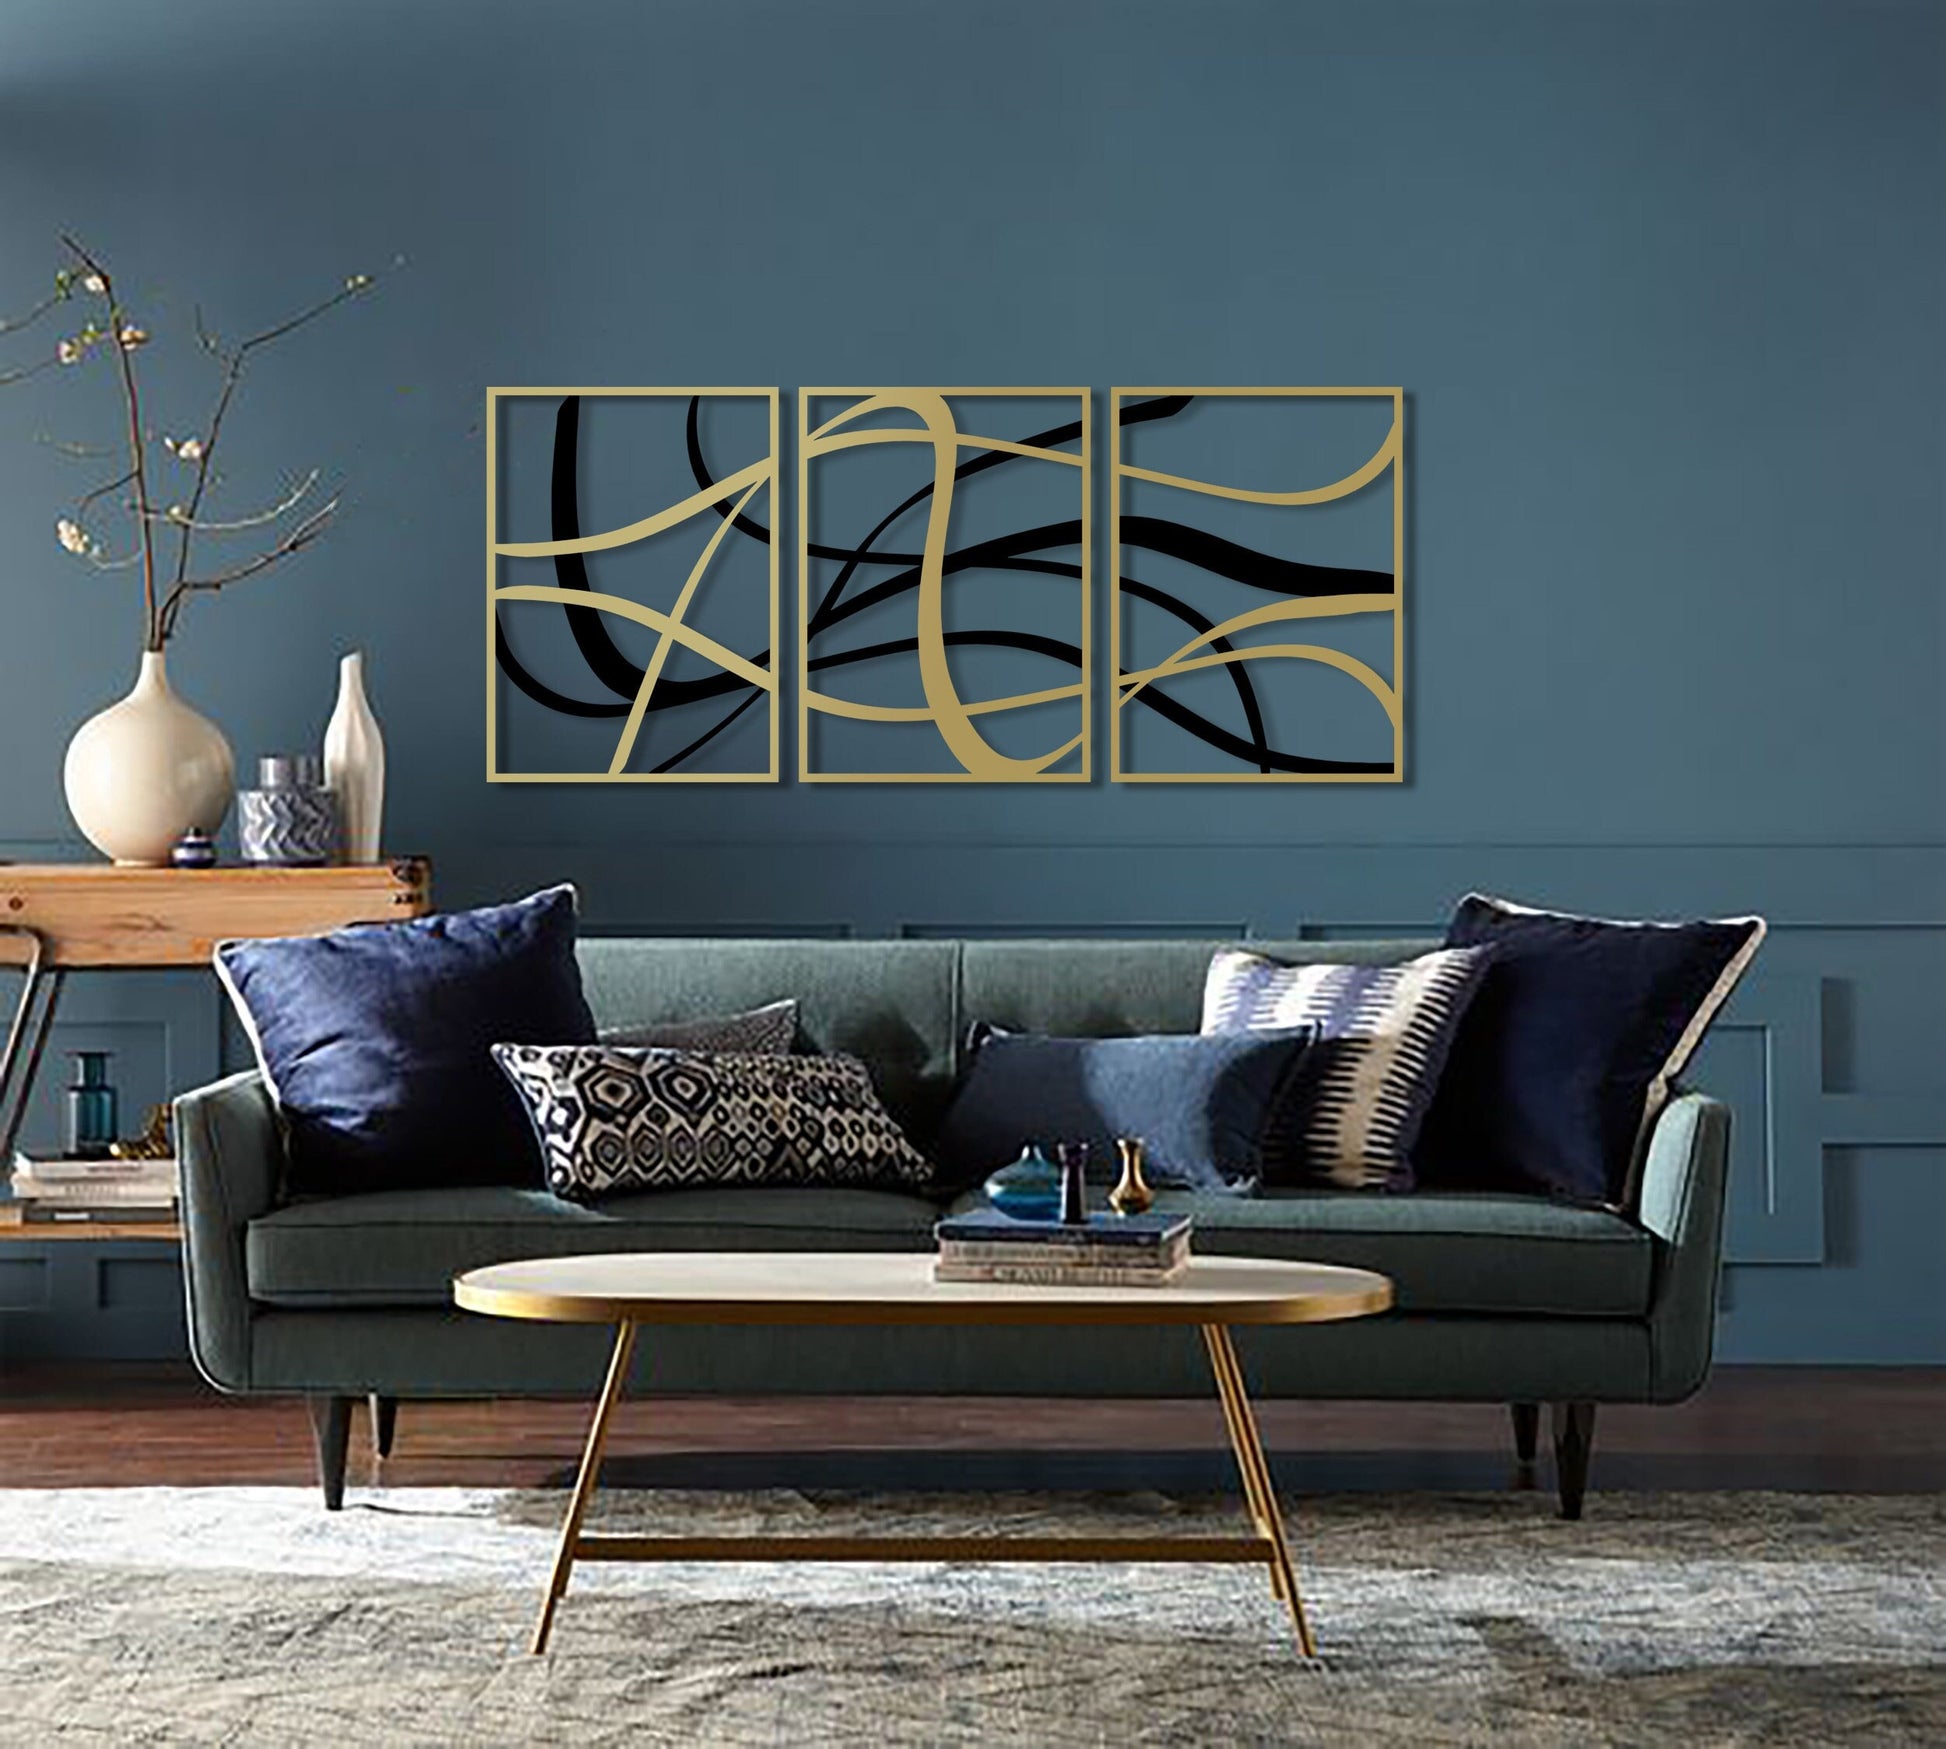 Large Abstract Metal Wall Decor, Black and Gold Wall Art, Elegant Modern Art, Large Abstract Design